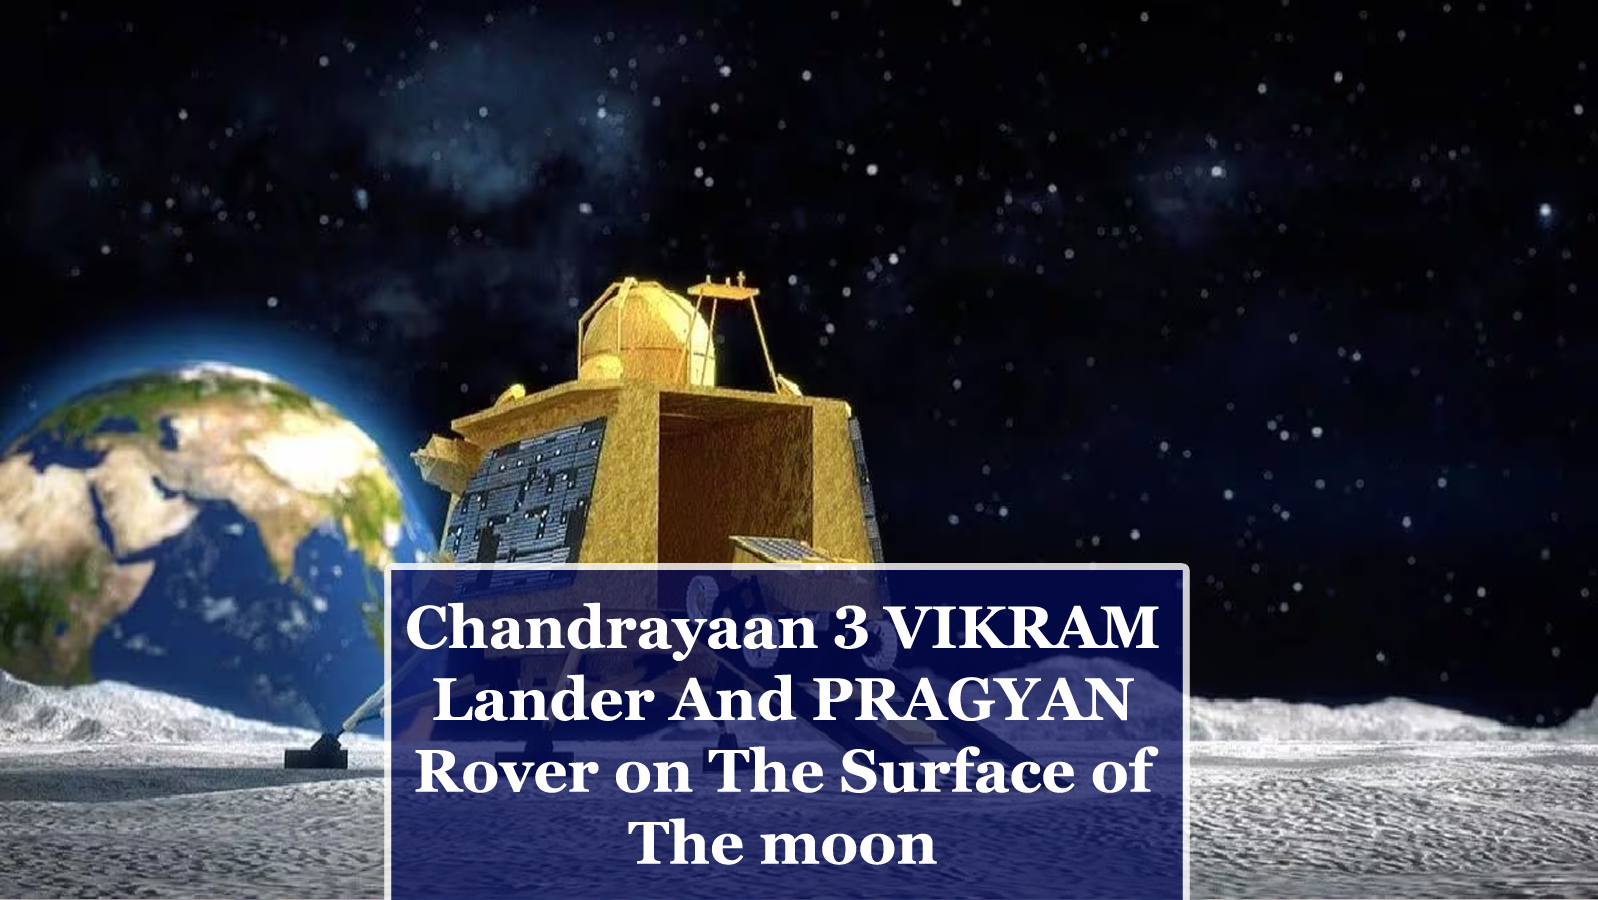 Chandrayaan 3 VIKRAM lander and PRAGYAN Rover on the surface of the moon